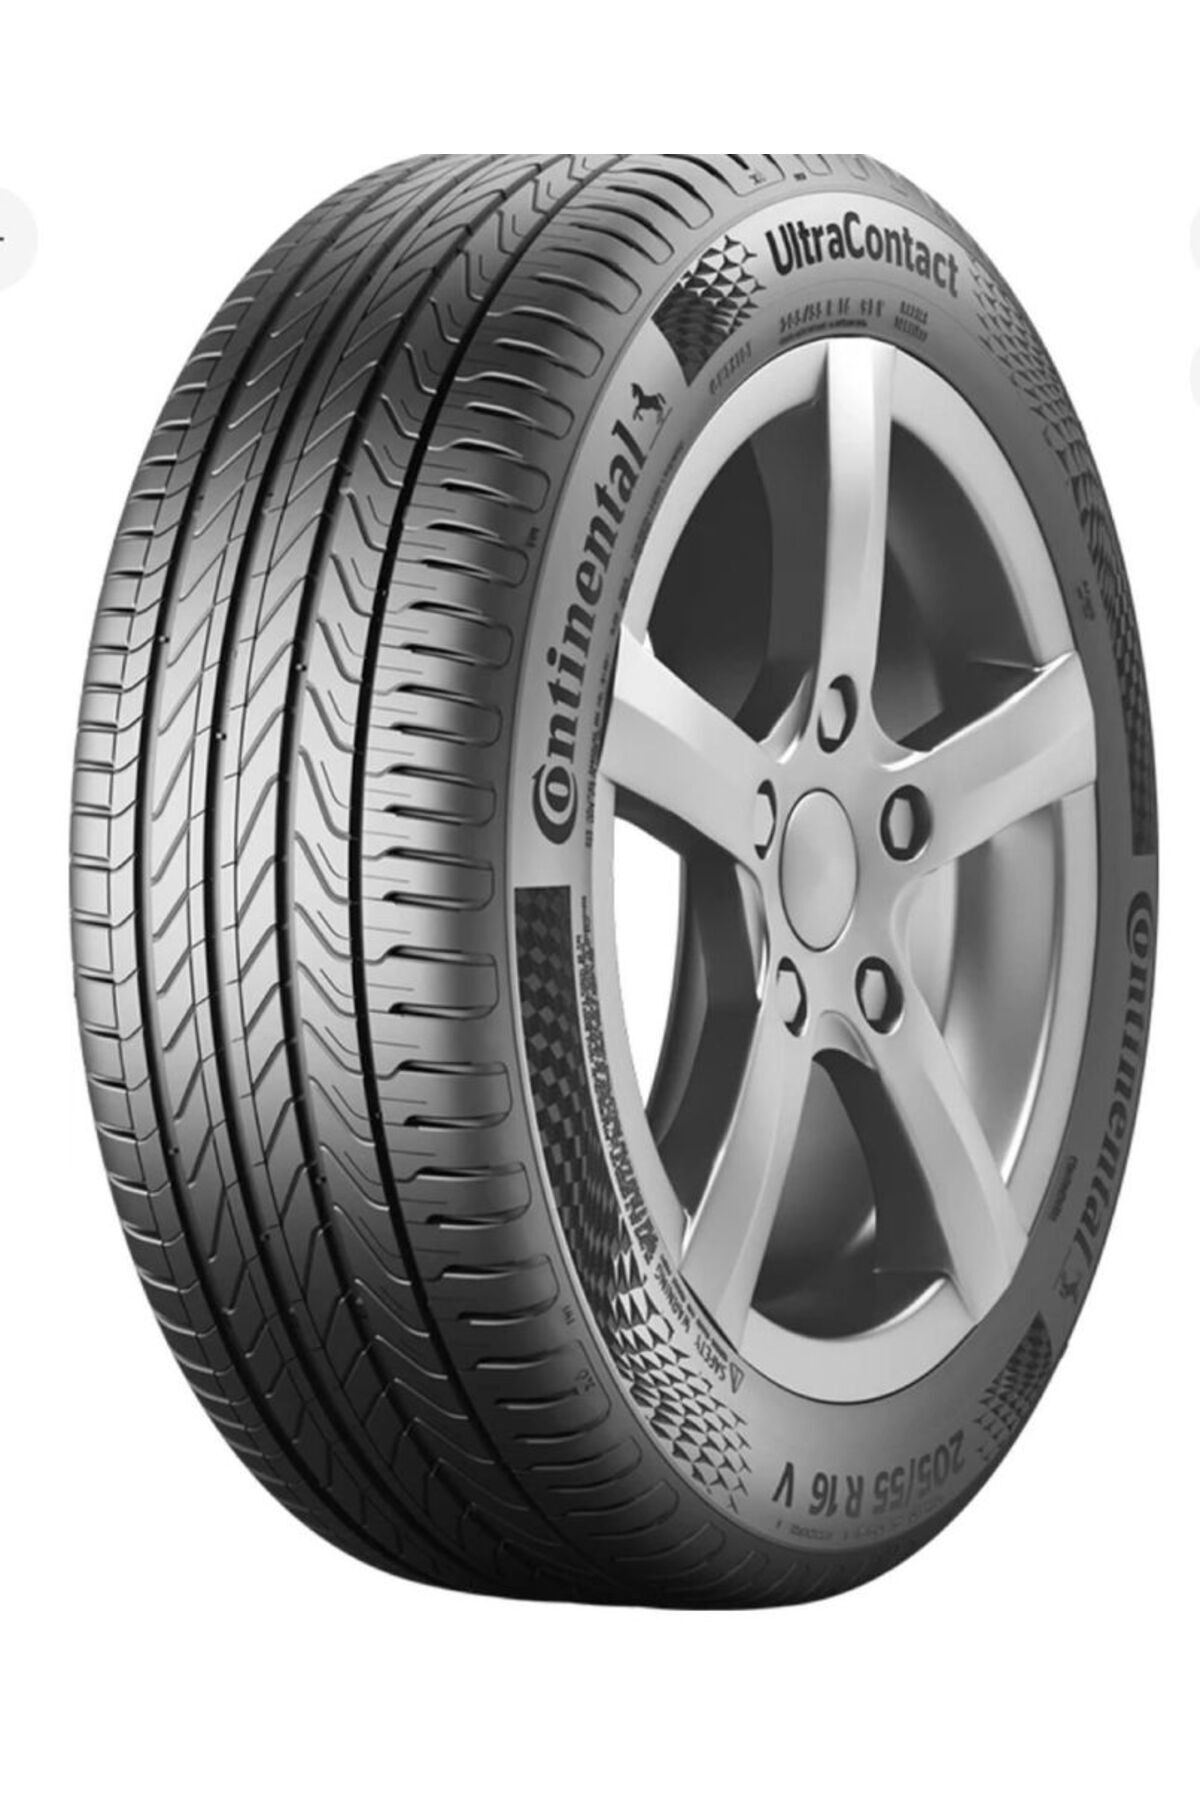 Continental 185/65 R 15 Contıultracontact 88t